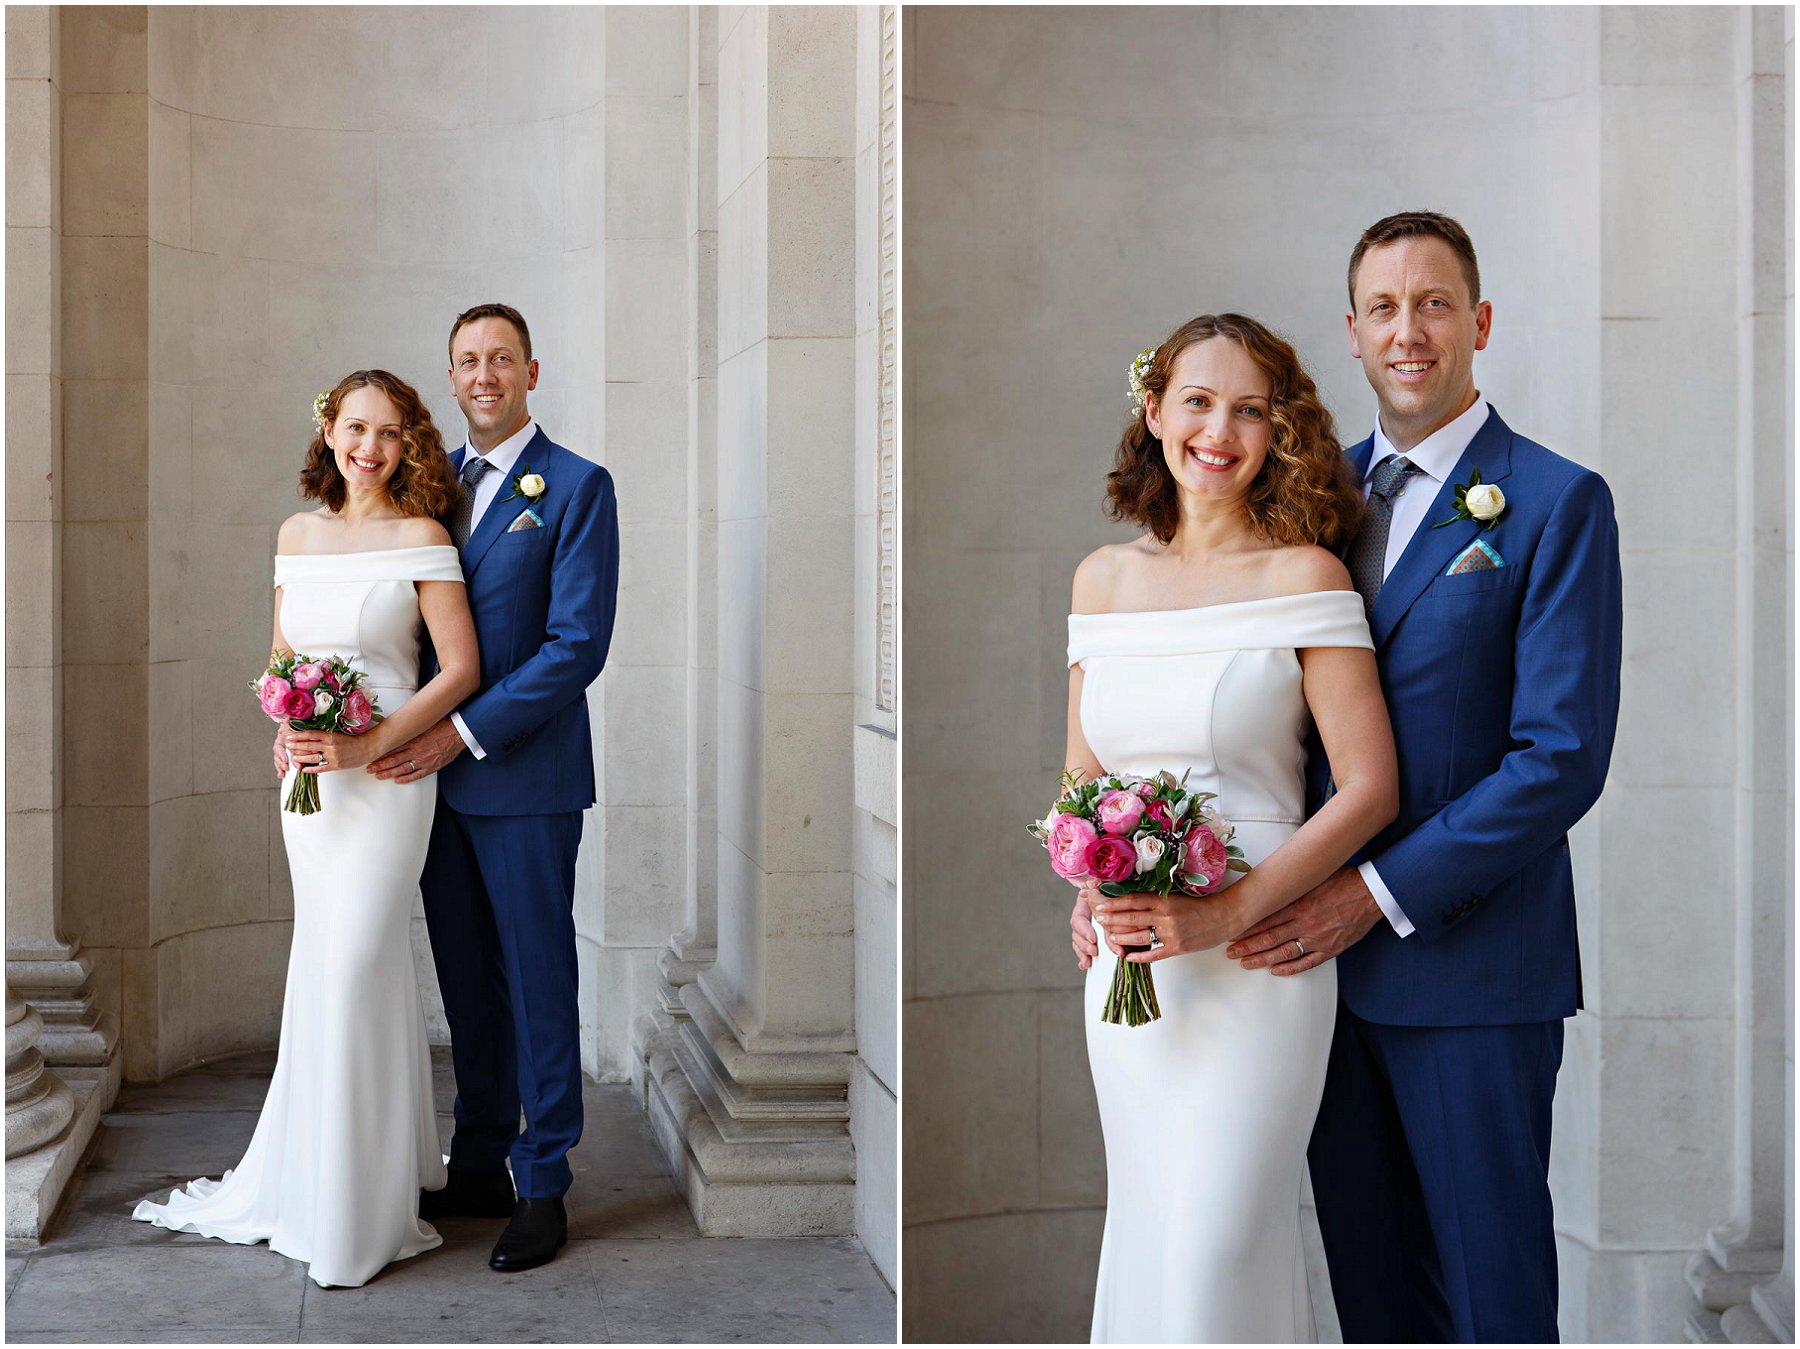 Timeless and elegant wedding portraits at The Old Marylebone Town Hall by YBPHOTOGRAPHIC